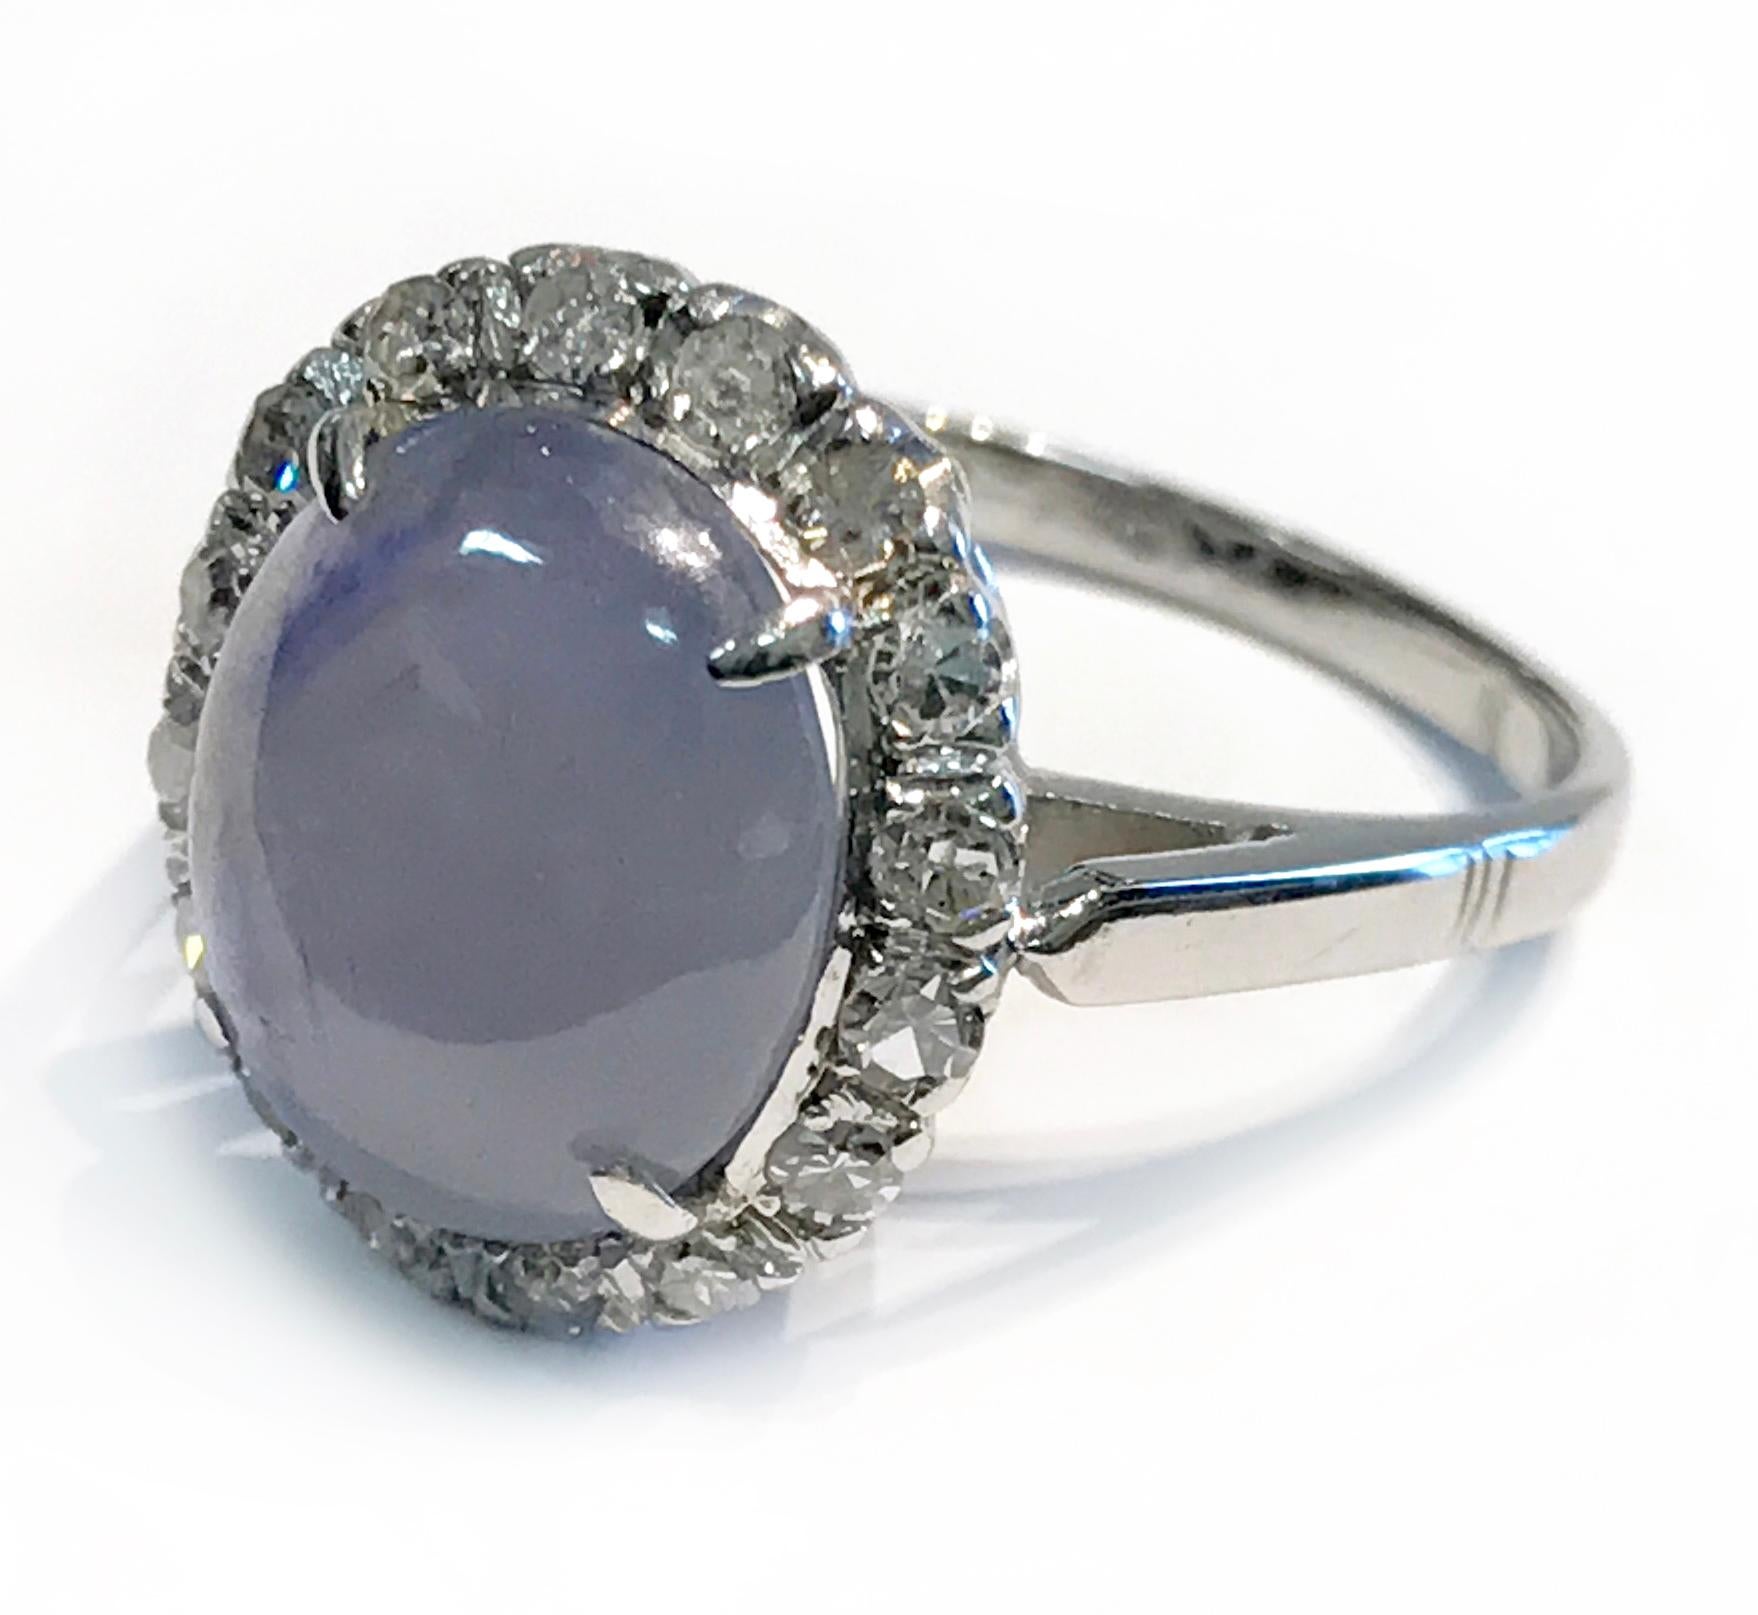 Vintage 14k White Gold Star Sapphire with Diamond Halo, 0.32 total carat weight. The natural Sapphire is 11.49mm x 9.64mm x 8.2mm, 8.17 carat, four prong set. The star has a good presence with light. The Diamond halo consists of sixteen single-cut